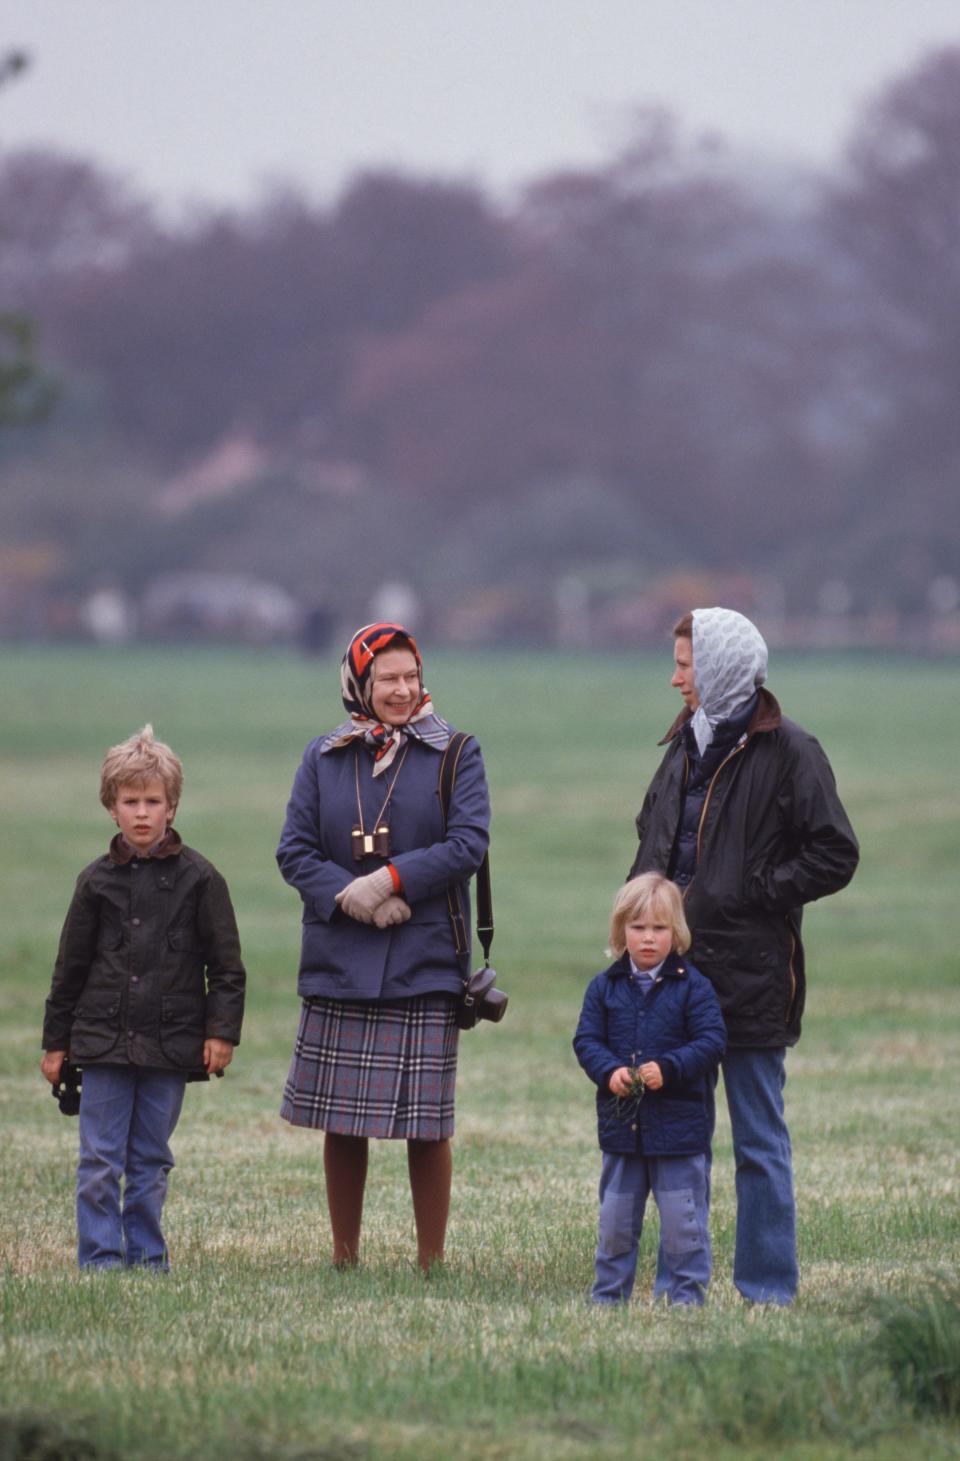 Queen Elizabeth II and Princess Anne with Anne's children Peter and Zara Phillips in Windsor on May 12, 1985.